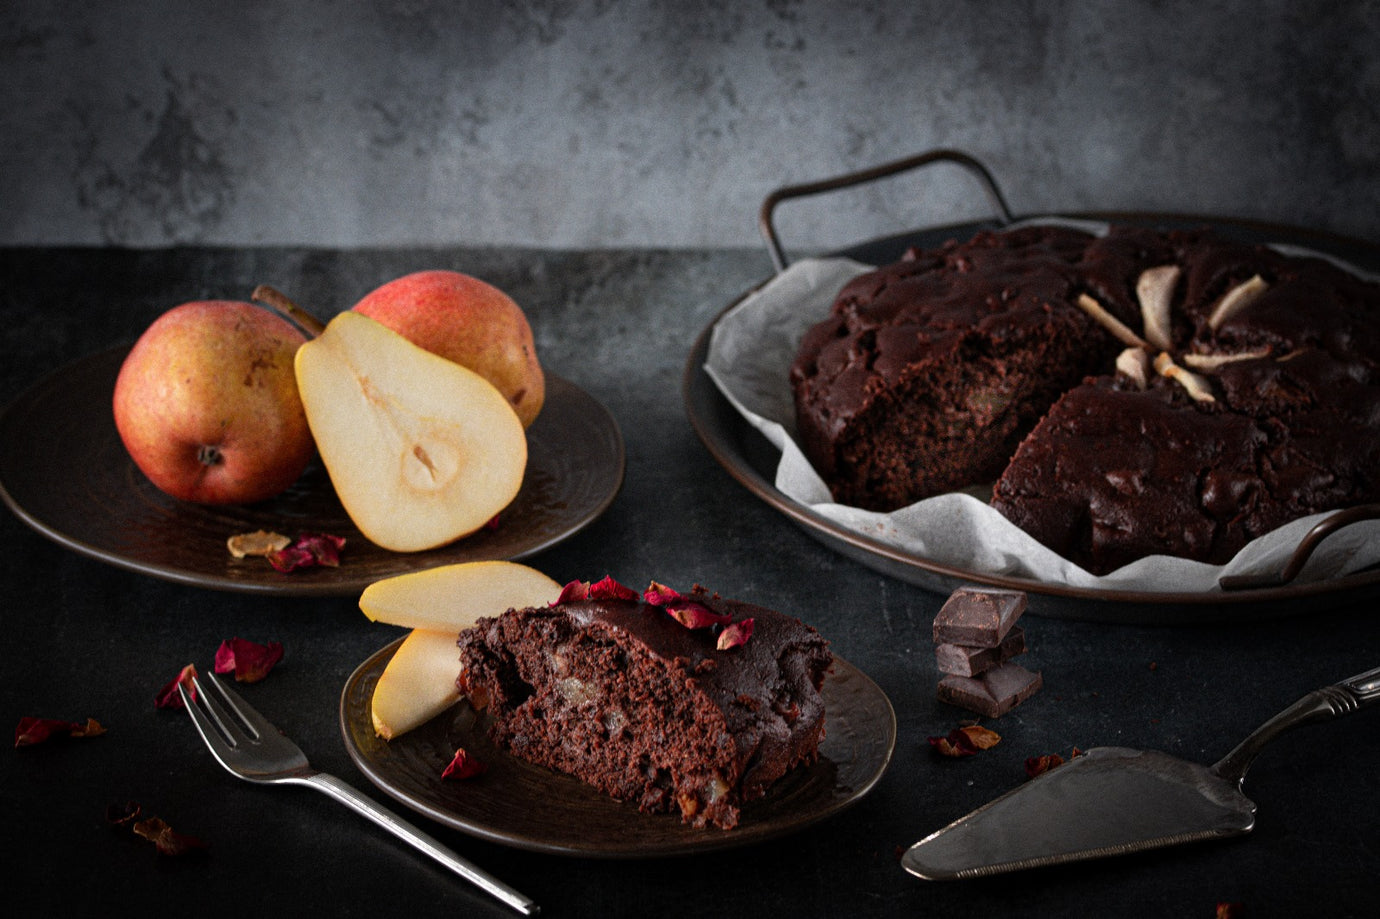 Chocolate and pear cake with biodynamic white grape must from Acetaia Guerzoni